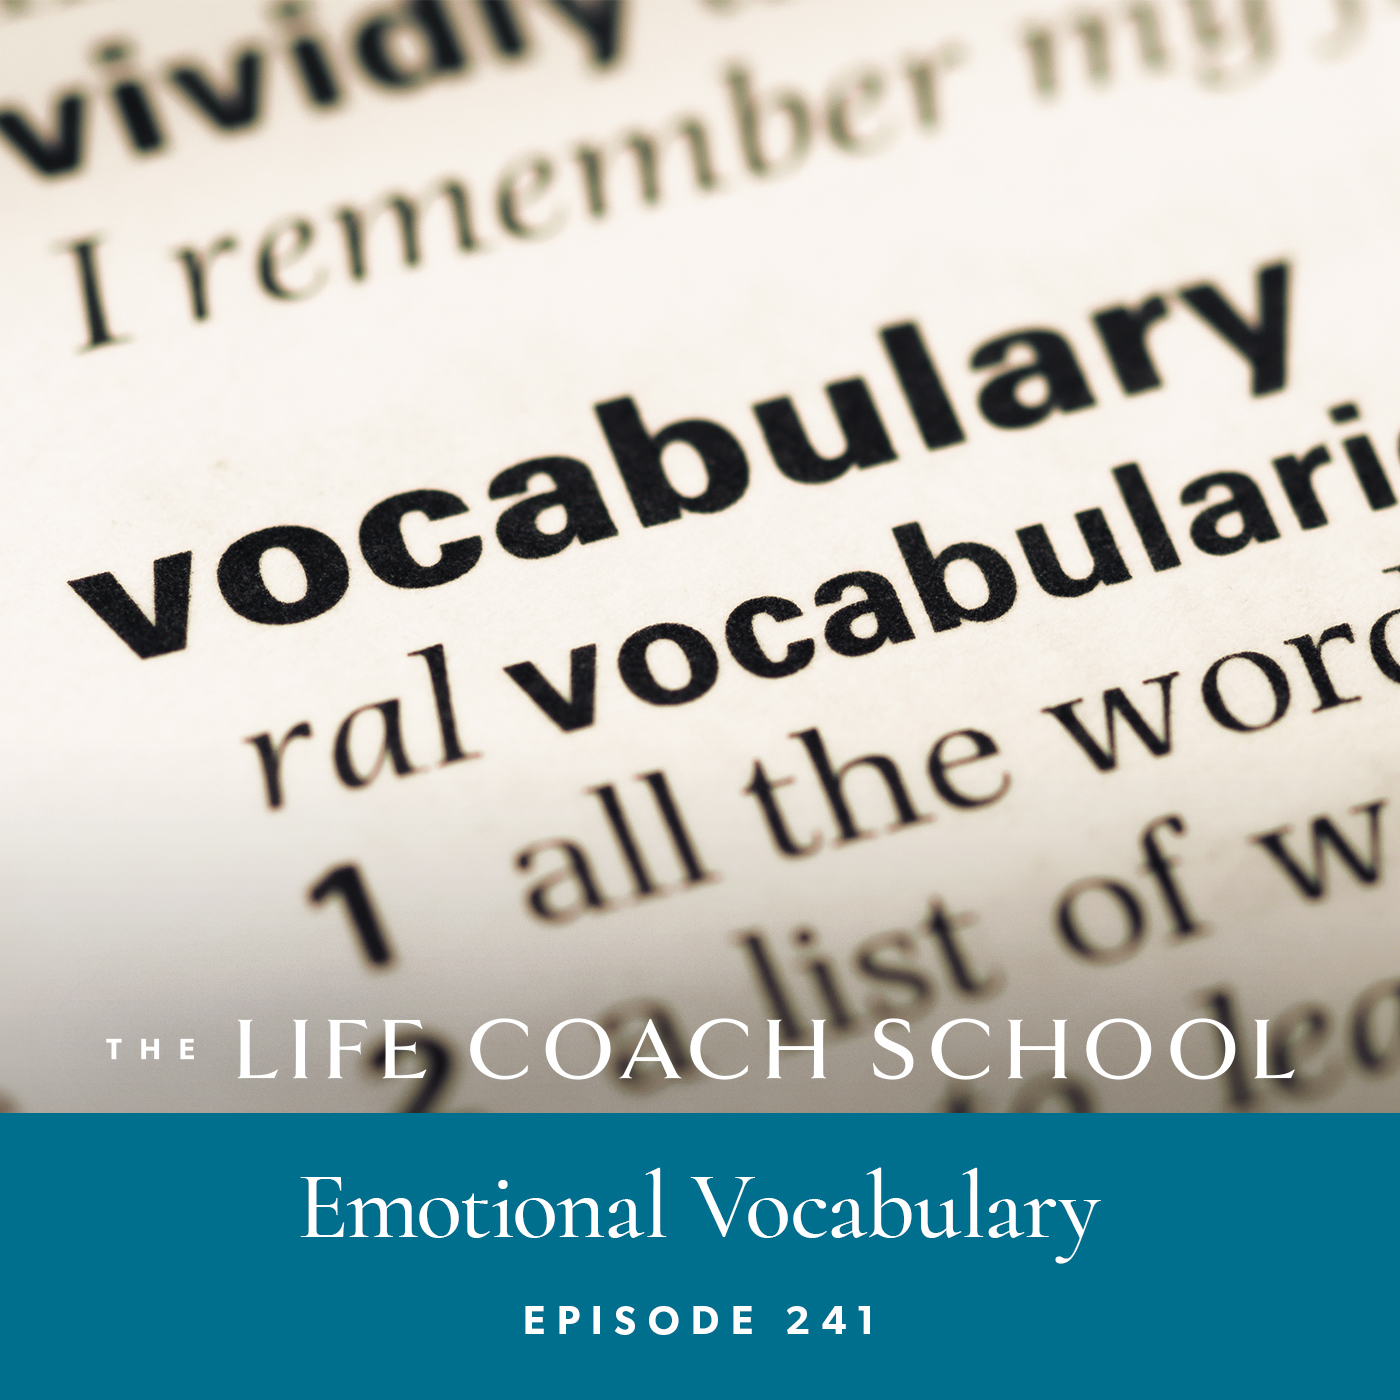 The Life Coach School Podcast with Brooke Castillo | Episode 241 | Emotional Vocabulary